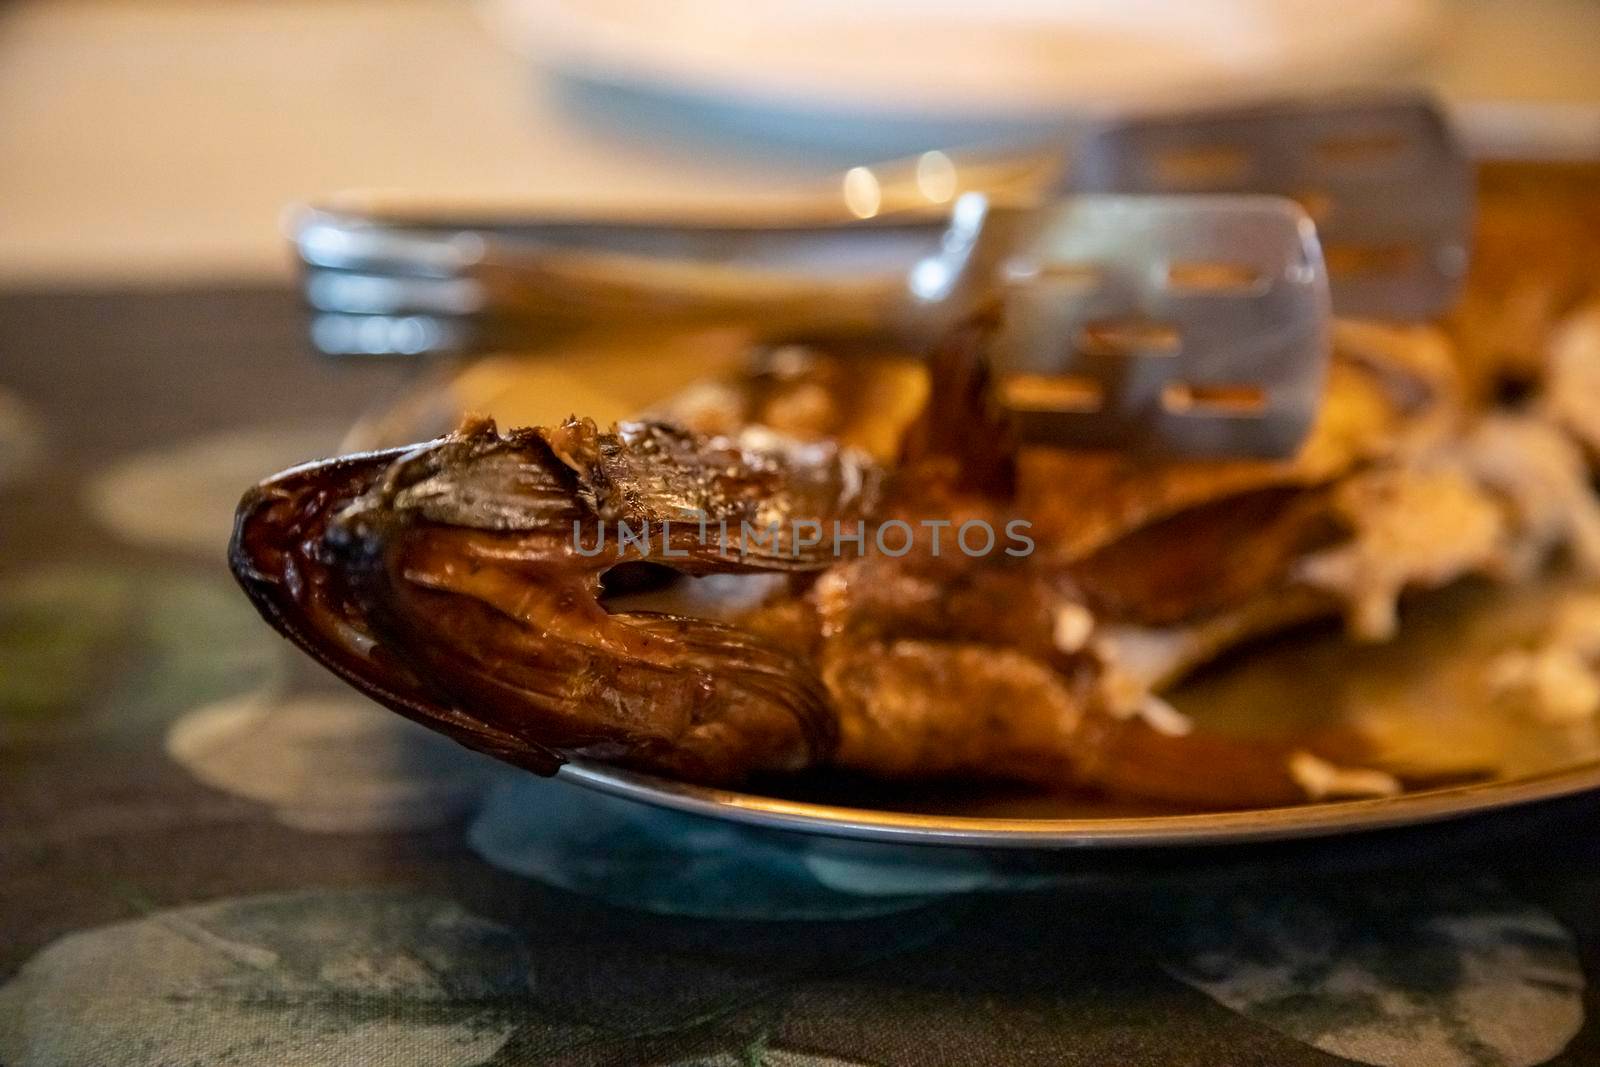 delicious smoked fish on a plate. close-up, selective focus, blurred background. dinner at reasaurant